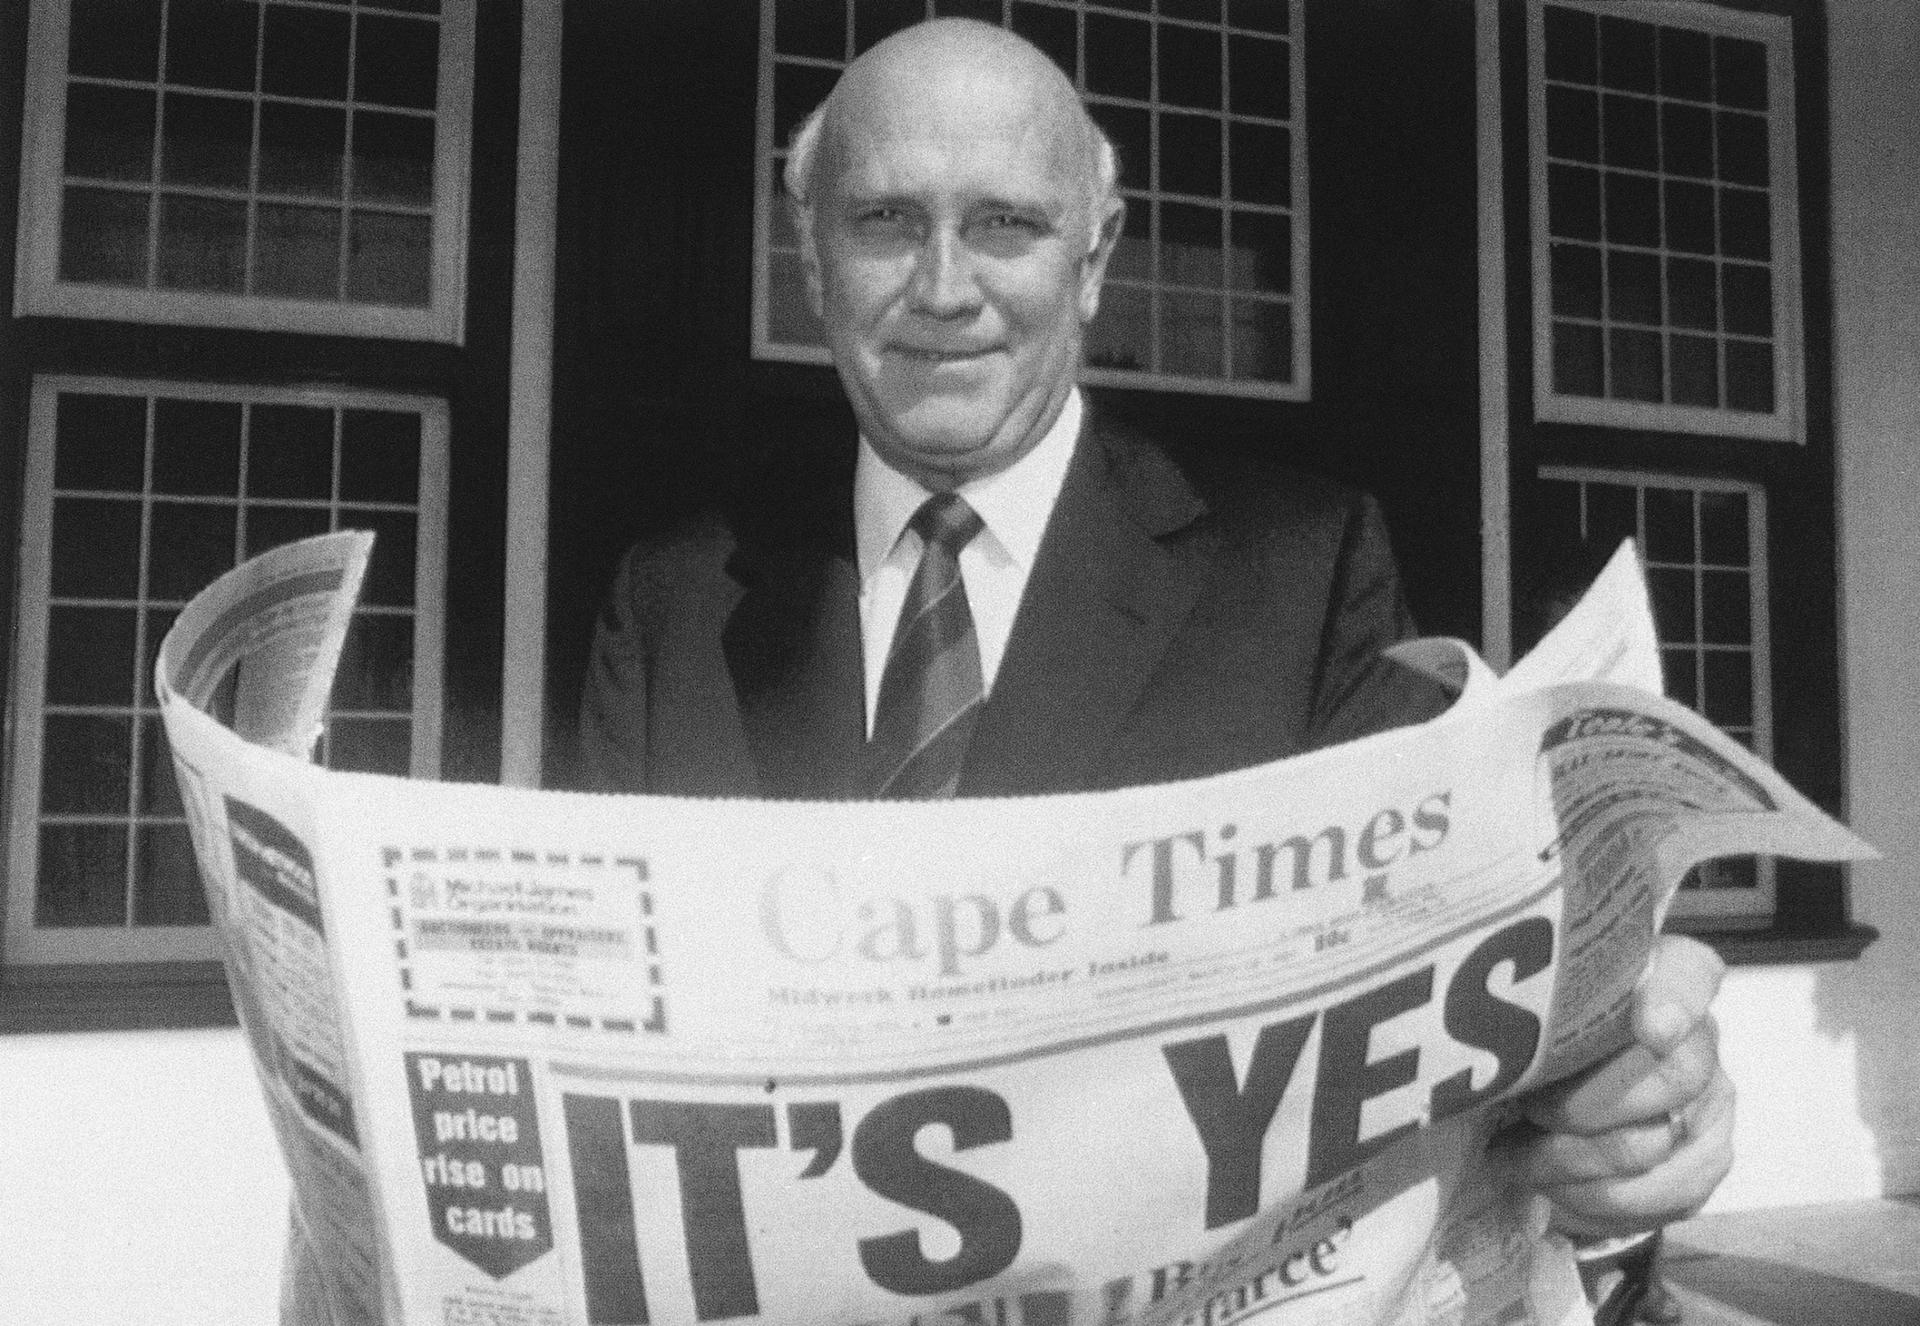 South African President FW de Klerk poses outside his office in Cape Town, South Africa March 18, 1992, while displaying a copy of a local newspaper with banner headlines declaring a "Yes" result in a referendum vote to end apartheid and share power with 